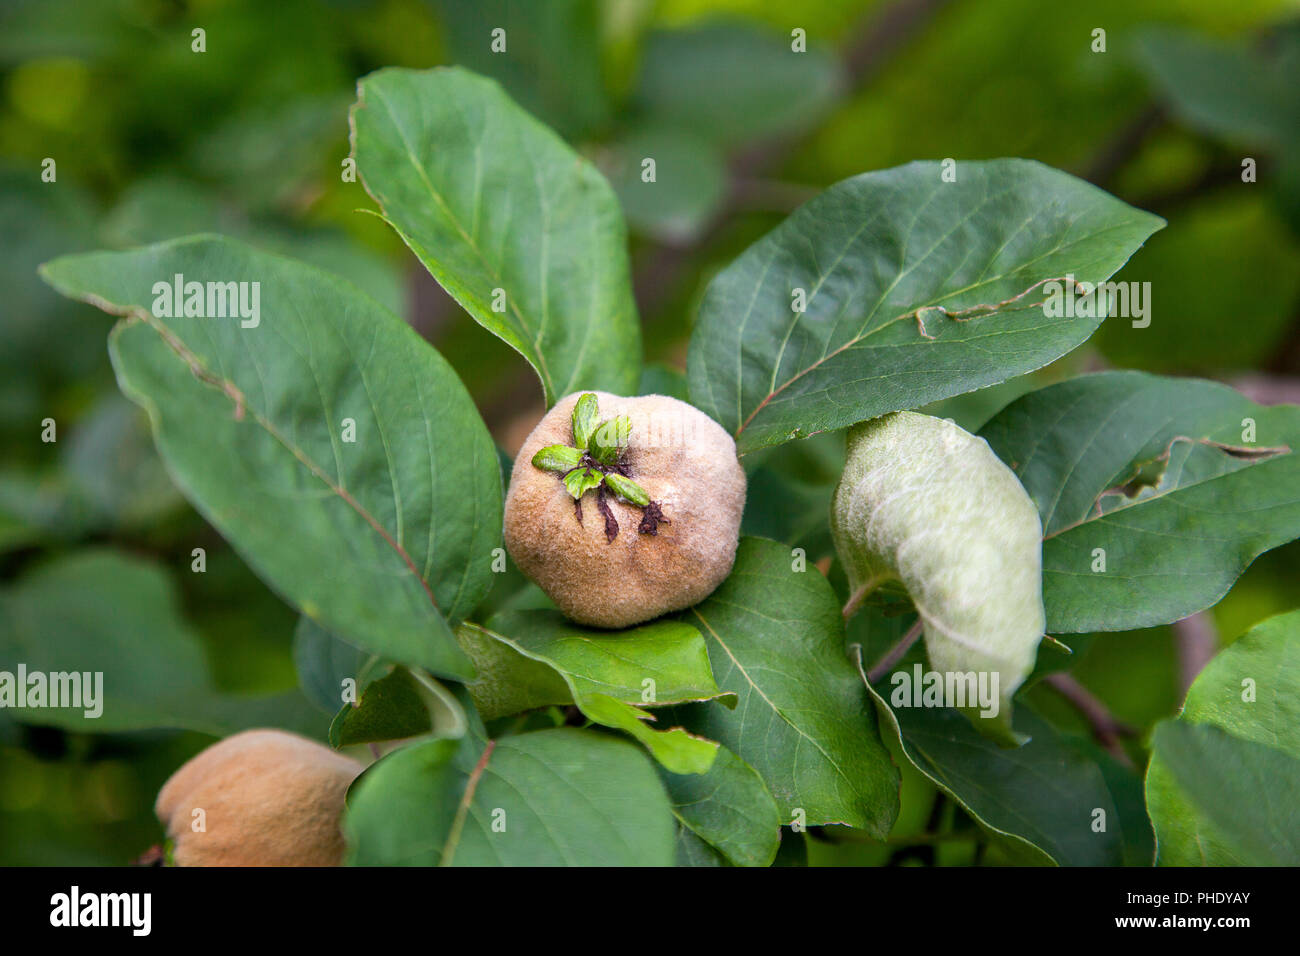 Organic apple quince in the garden. Close up view of apple quince hanging on tree branch with green leaves Stock Photo